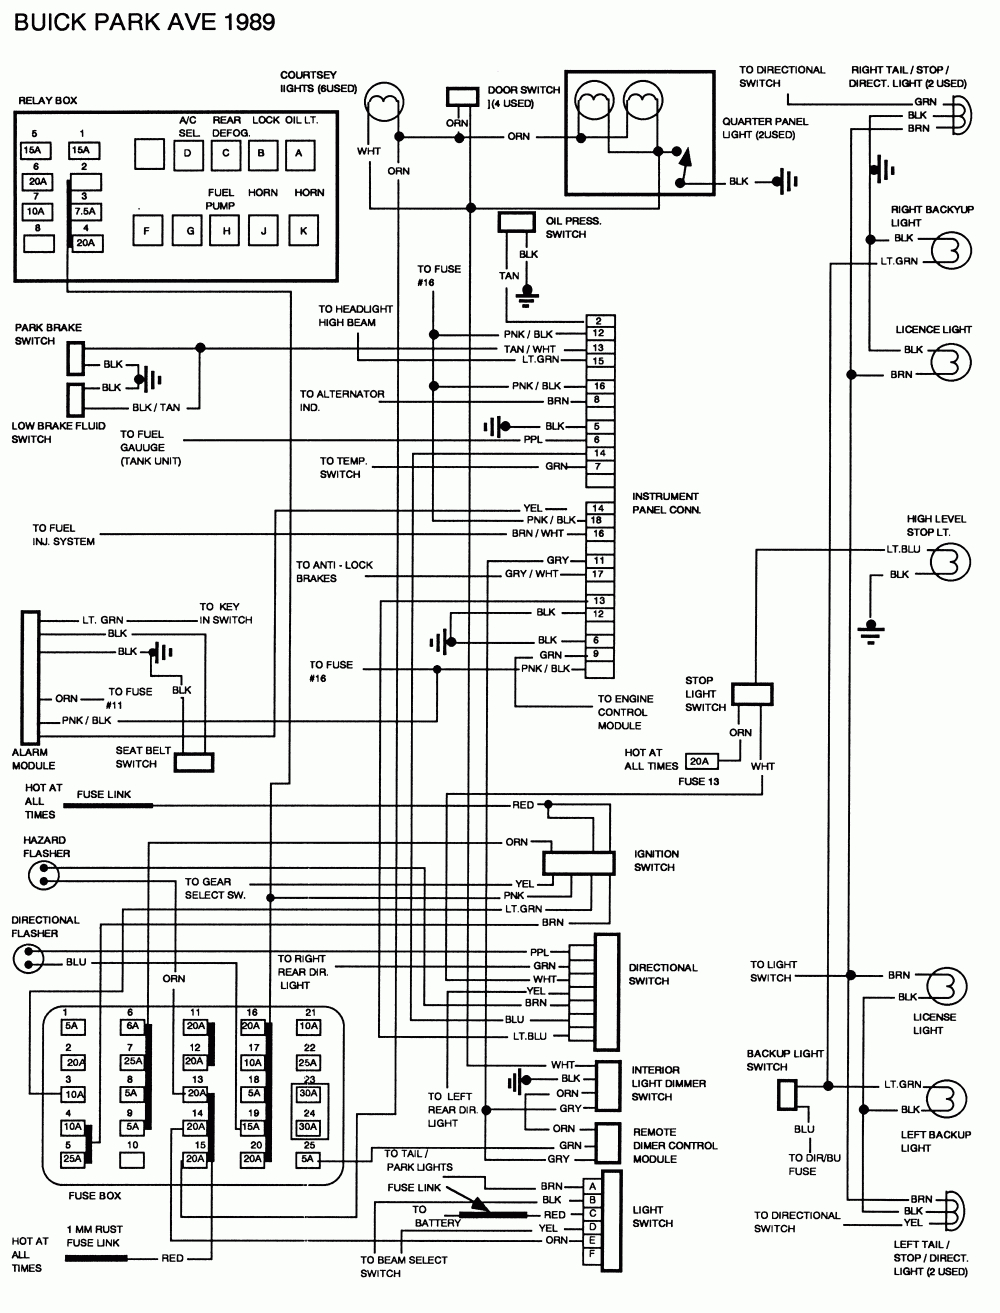 2001 Buick Lesabre Motor Mount Diagram Wiring Schematic - Data - Ignition Switch Wiring Diagram Chevy